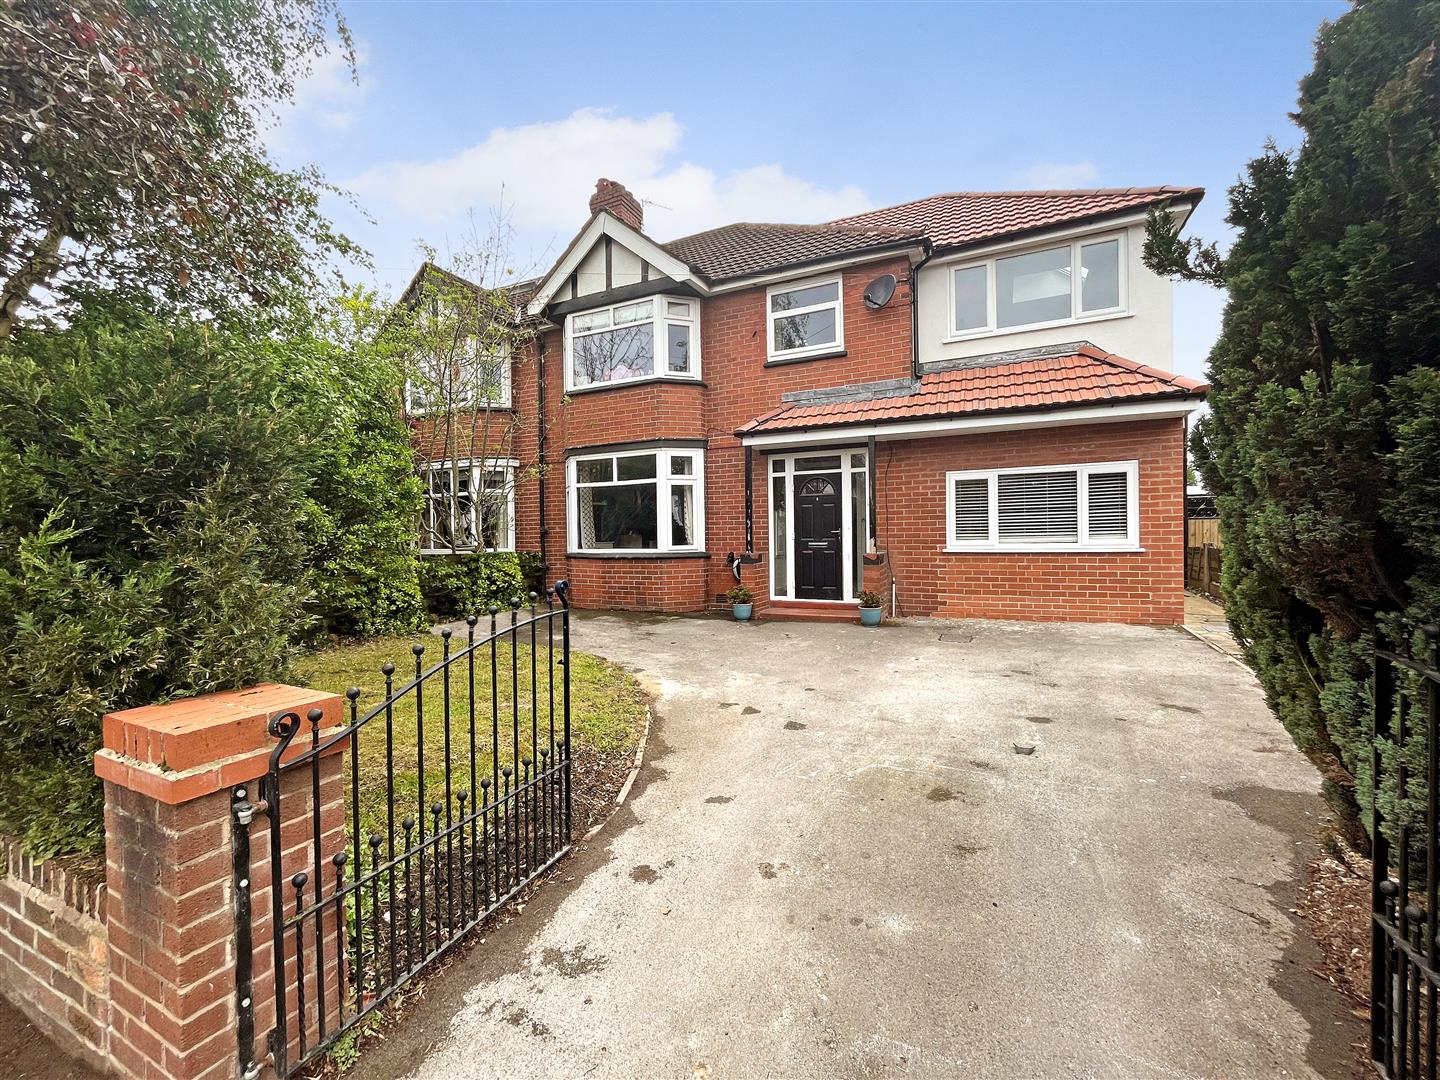 4 bed semi-detached house for sale in Winstanley Road, Sale - Property Image 1